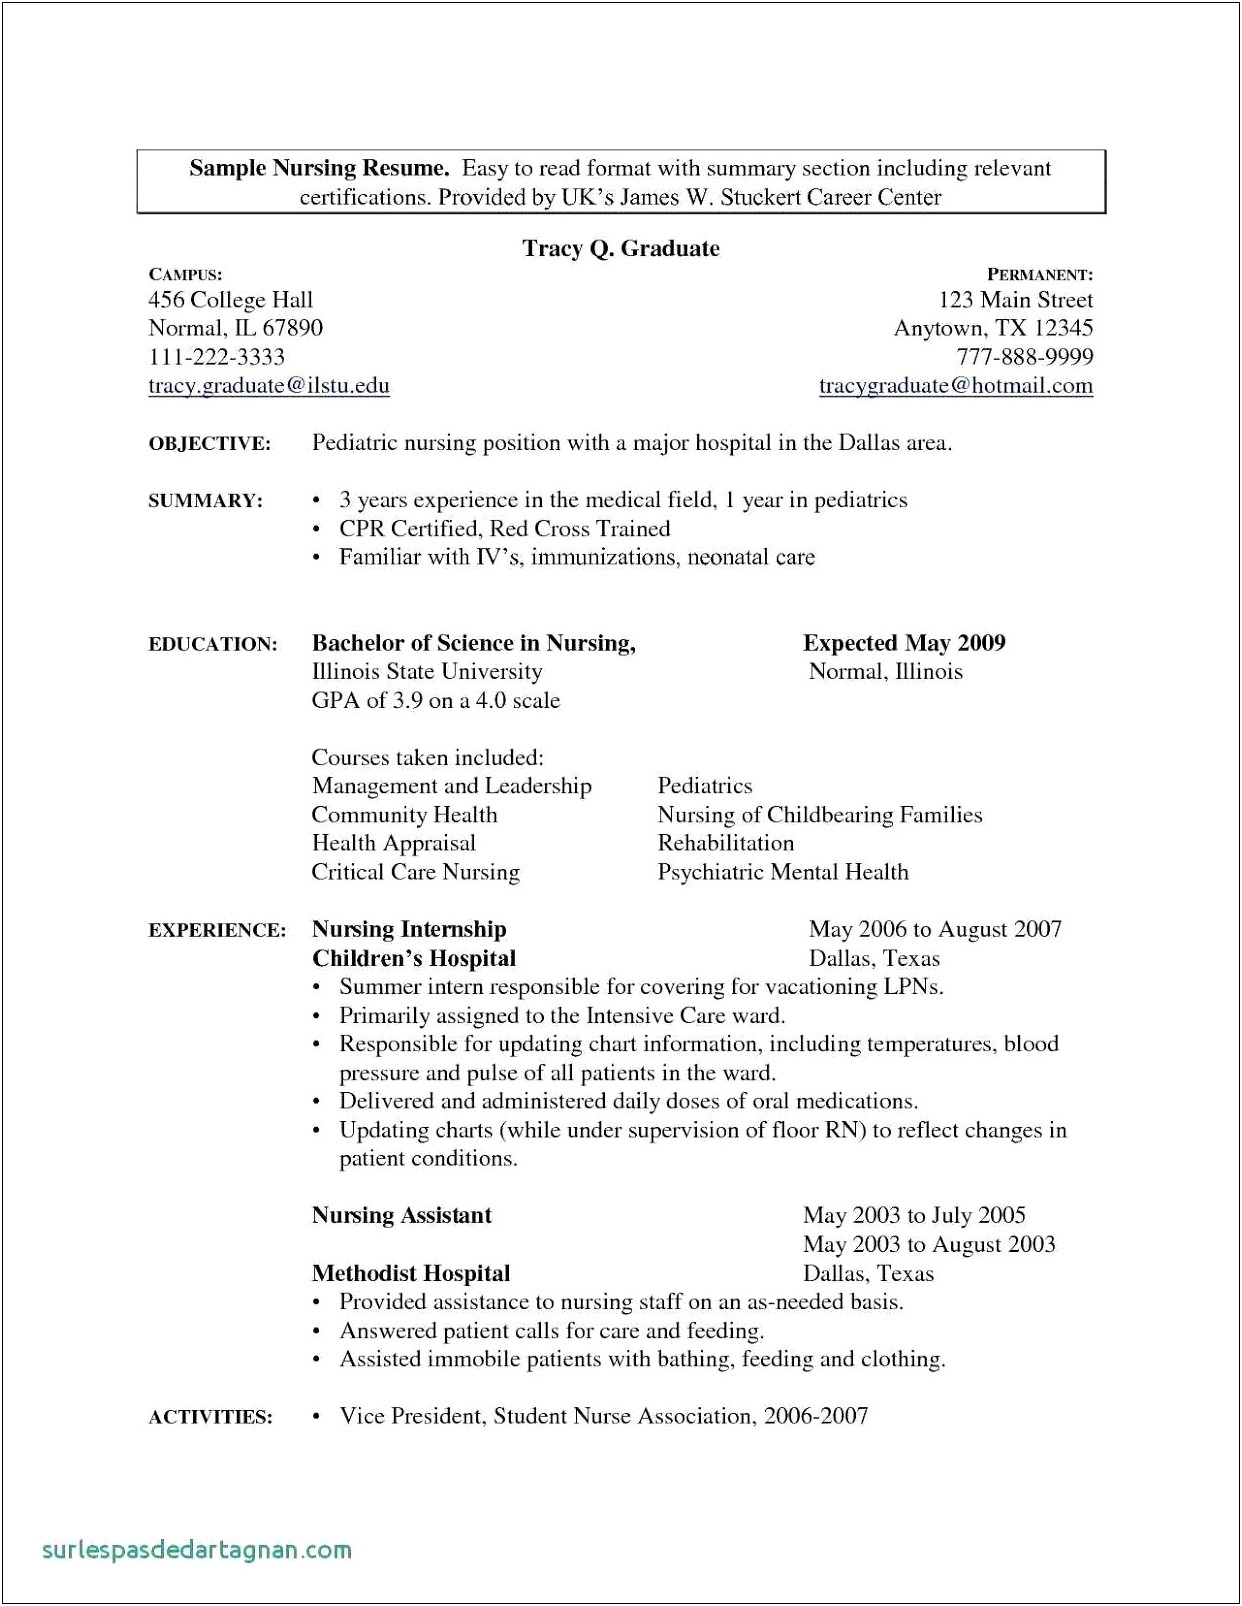 Medical Administrative Assistant Resume With Internship Experience Resume